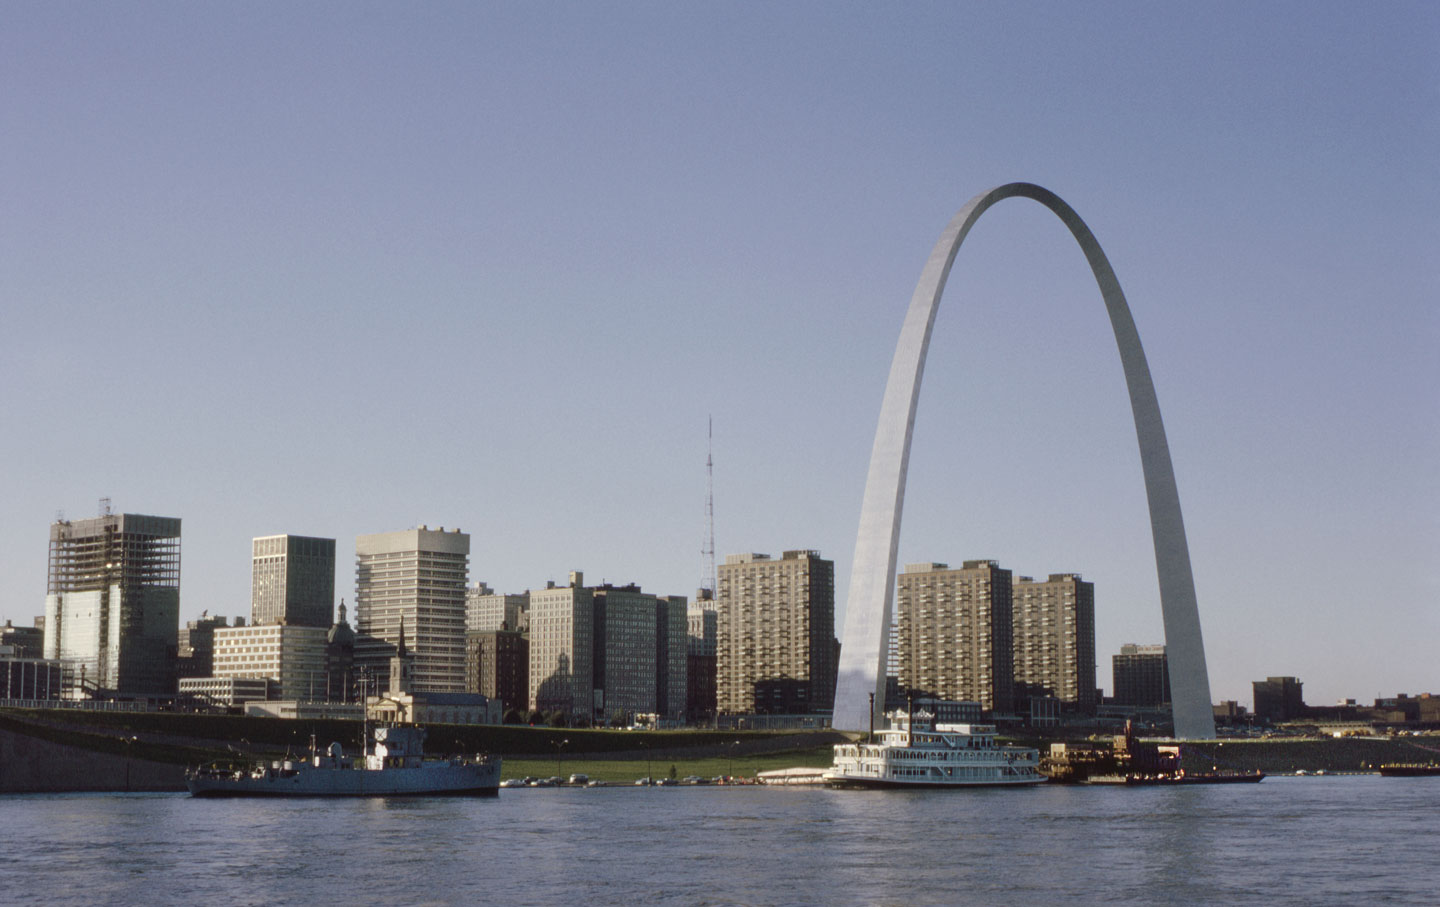 St. Louis Considers Spy Planes to Survey the City 18 Hours a Day